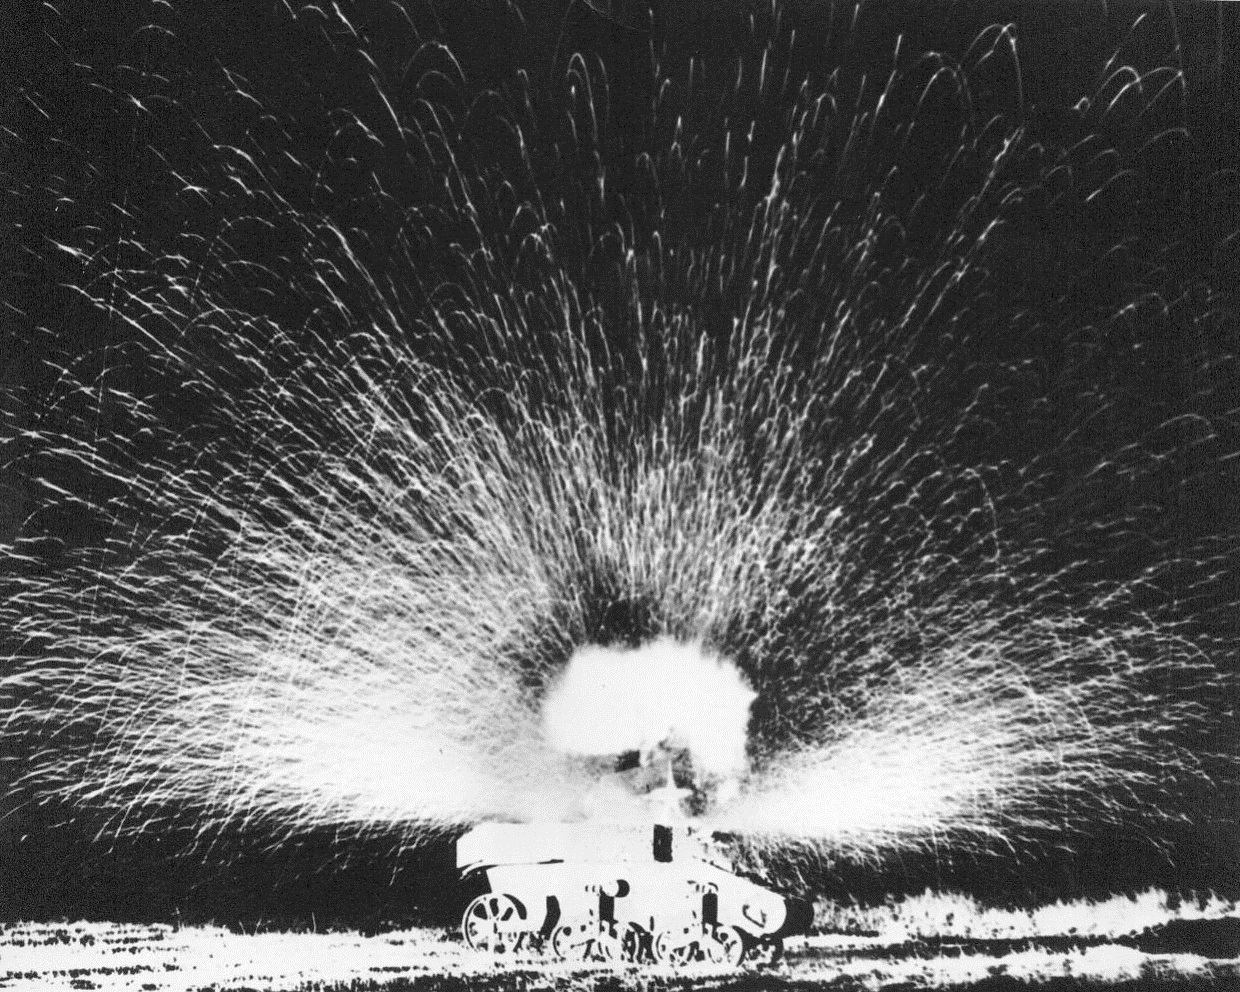 Bazooka Plays a Deadly Tune, 9/12/1944. Sparks fly in all directions in a display of pyrotechnics caused by the deadly power of the "Bazooka." A single high explosive rocket sends a shower of moltenmetal into the night and leaves a three-inch hole in the armor planting of the tank during exhibition at Camp Roberts, Calif.;